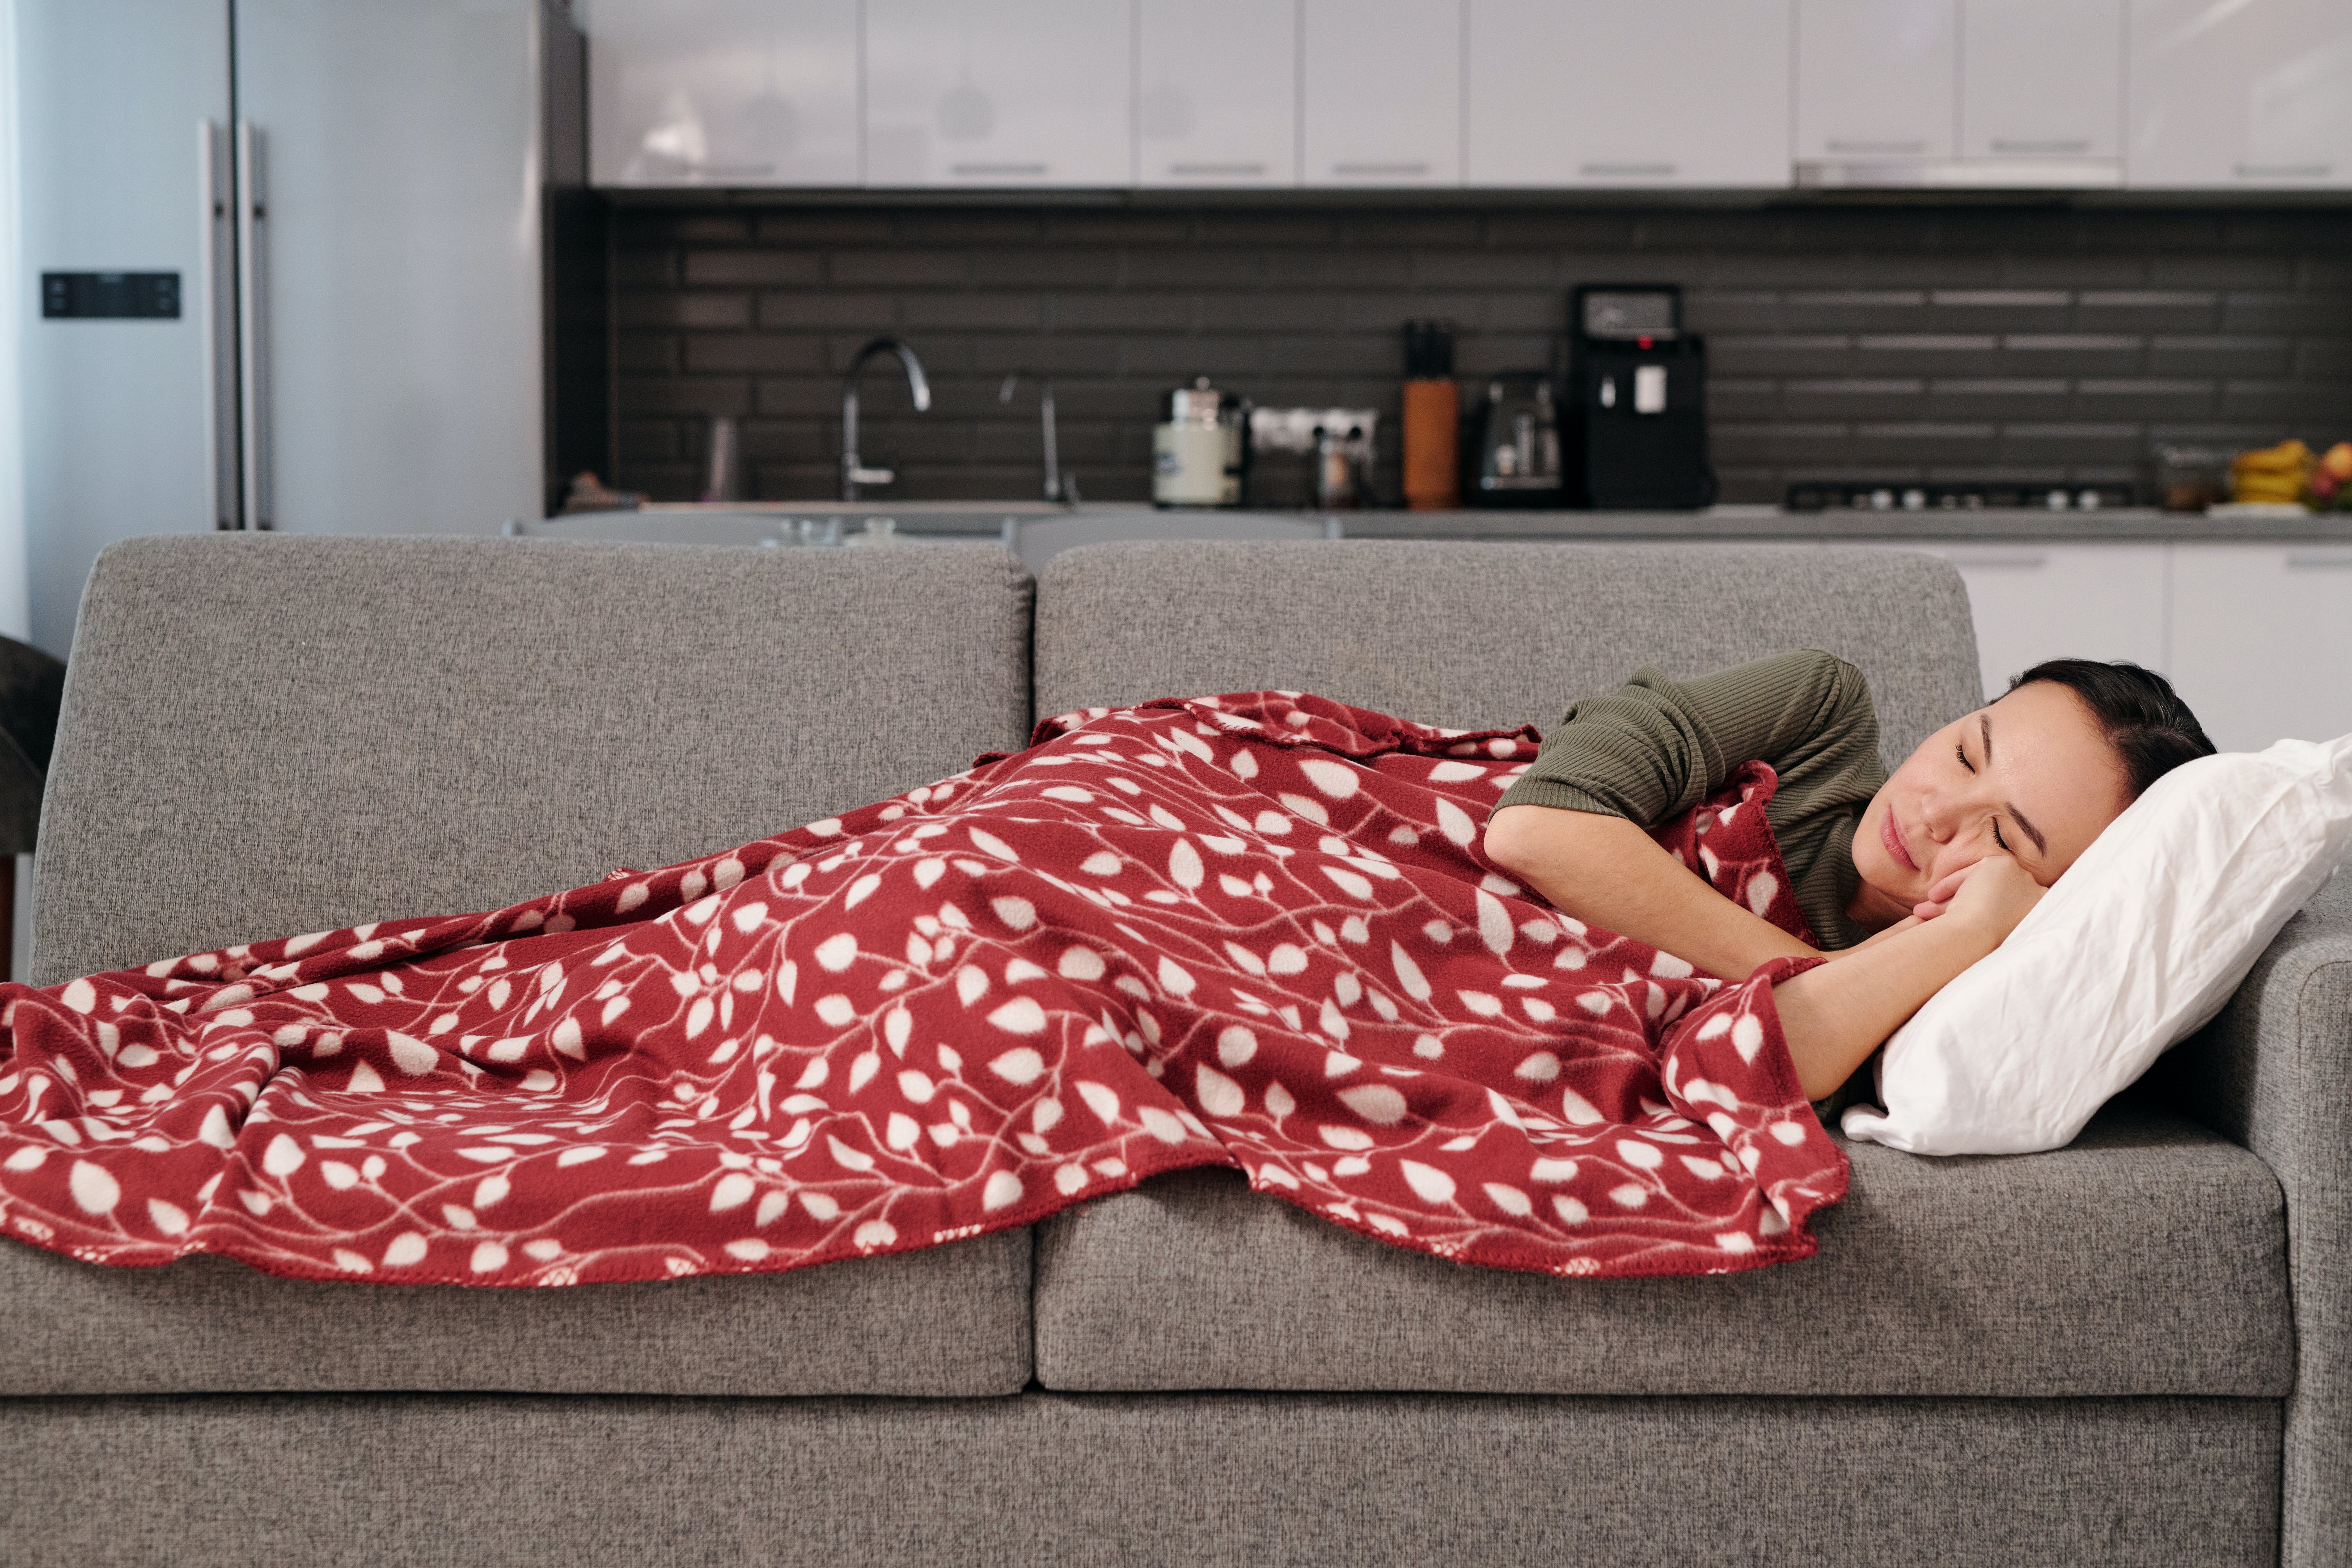 Woman sleeping on couch | Source: Pexels